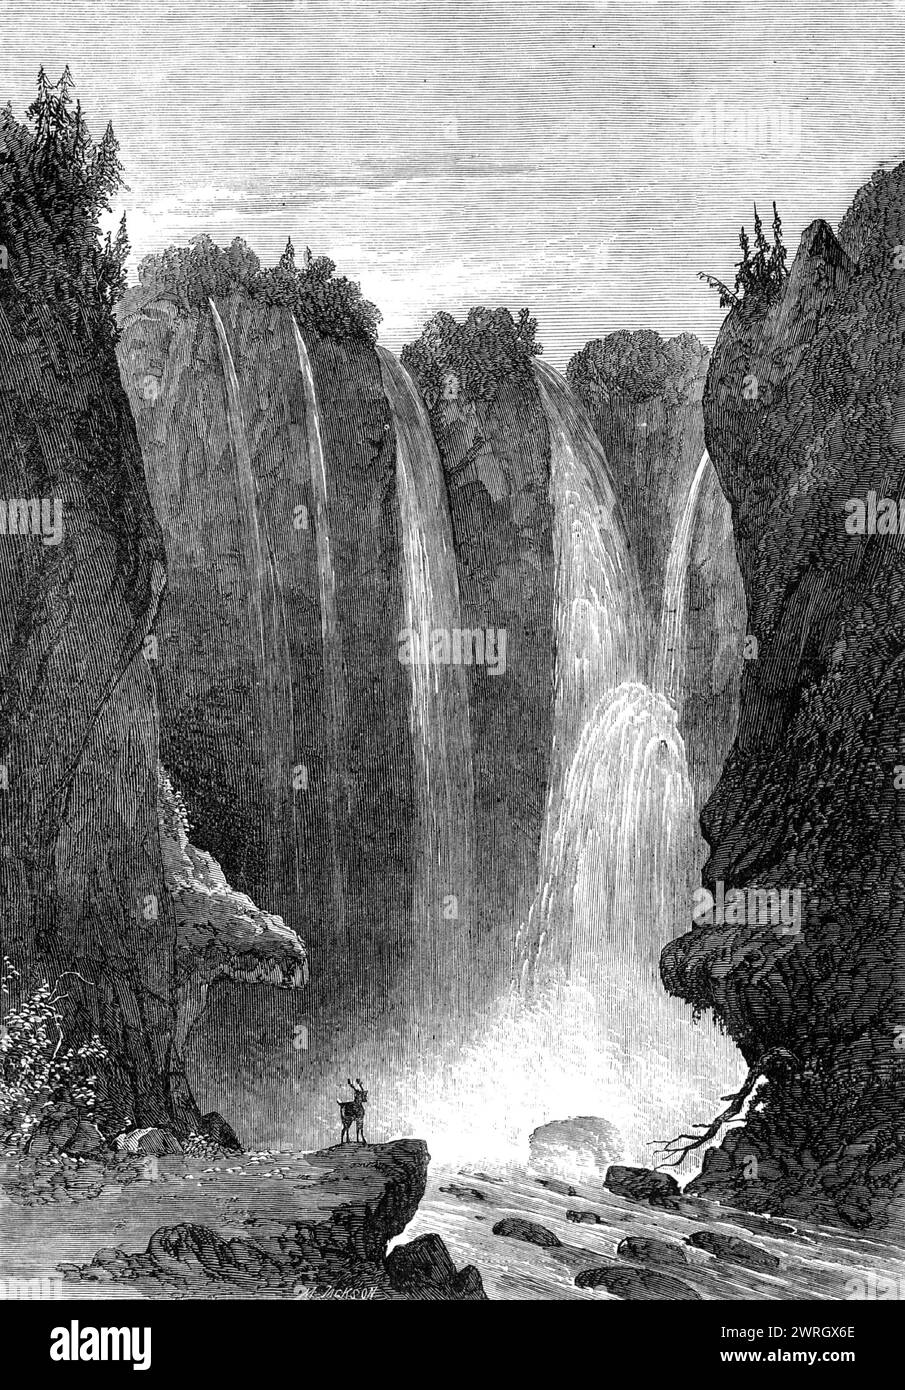 Peyton Falls, Alleghany County, Virginia, 1864. Engraving of a '...sketch, by an amateur artist, of Peyton Falls, in the Alleghany Mountains, Western Virginia. This romantic and beautiful cascade is on the Falling Spring, a brook tributary to Jackson's River. It is situated in the district or township which was once known as West Augusta...Peyton Falls is the highest cascade or waterfall in America, being 200 ft. in height, while that of Niagara is only 150 ft. The principal stream, however, is only about 10 yards wide at the top and a little more spread at the bottom of the fall. The water is Stock Photo